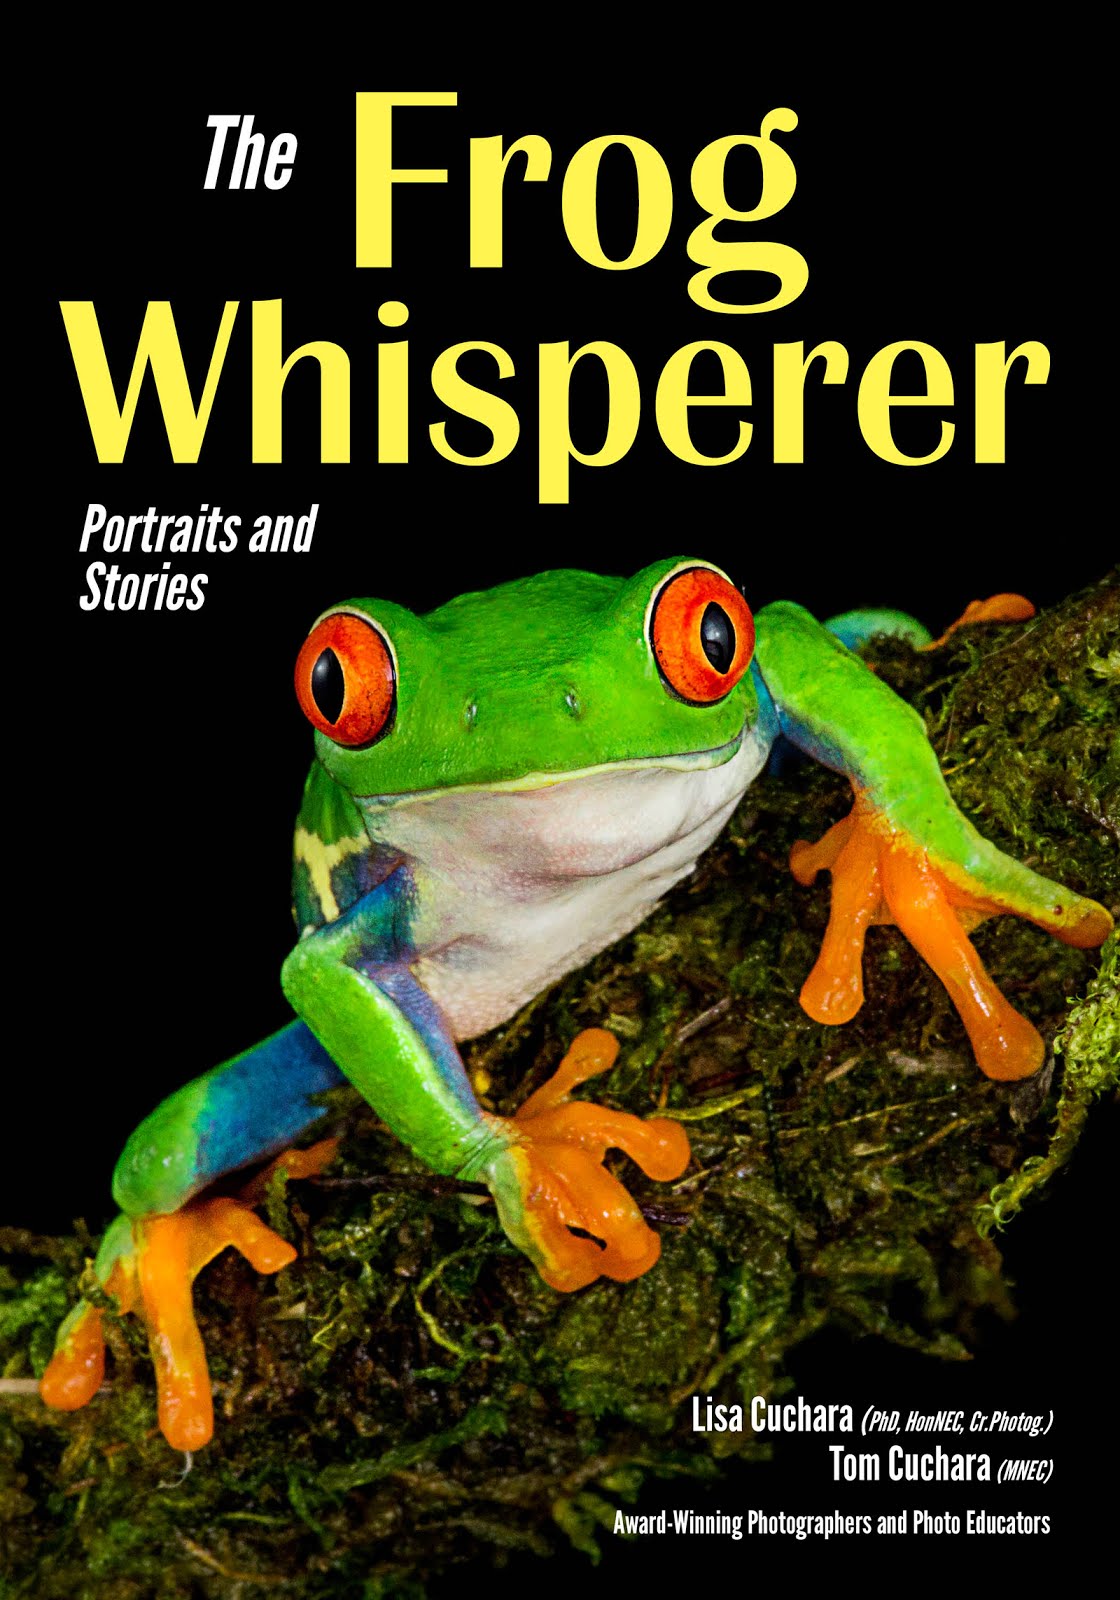 Our 2nd Book: The Frog Whisperer